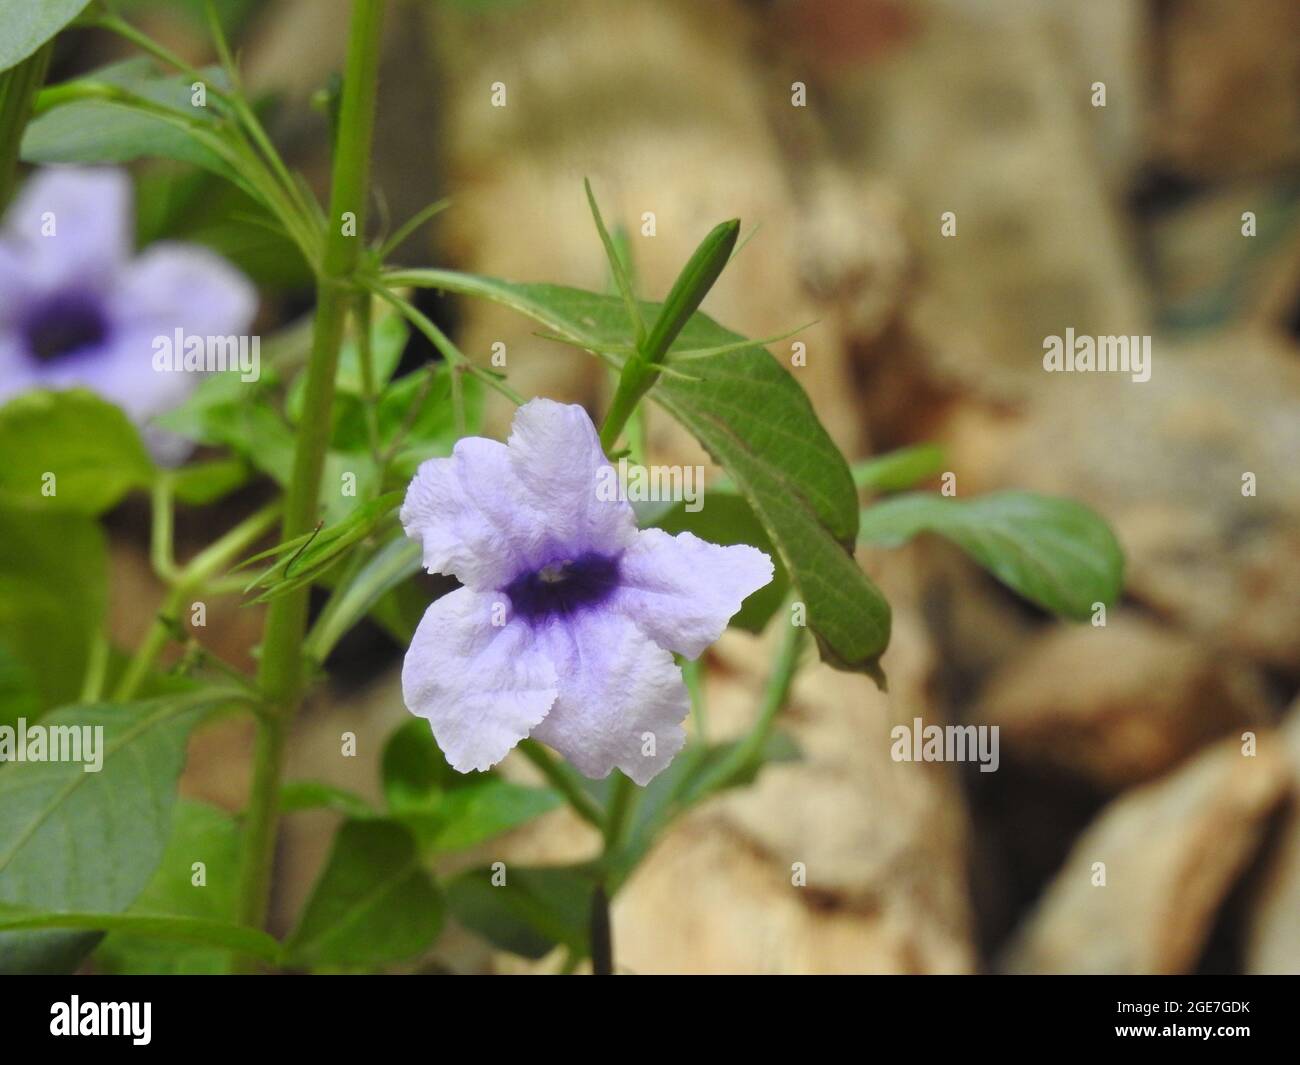 Closeup of beautiful Bengal clockvine or Morning purple flower in a plant with leaves background Stock Photo